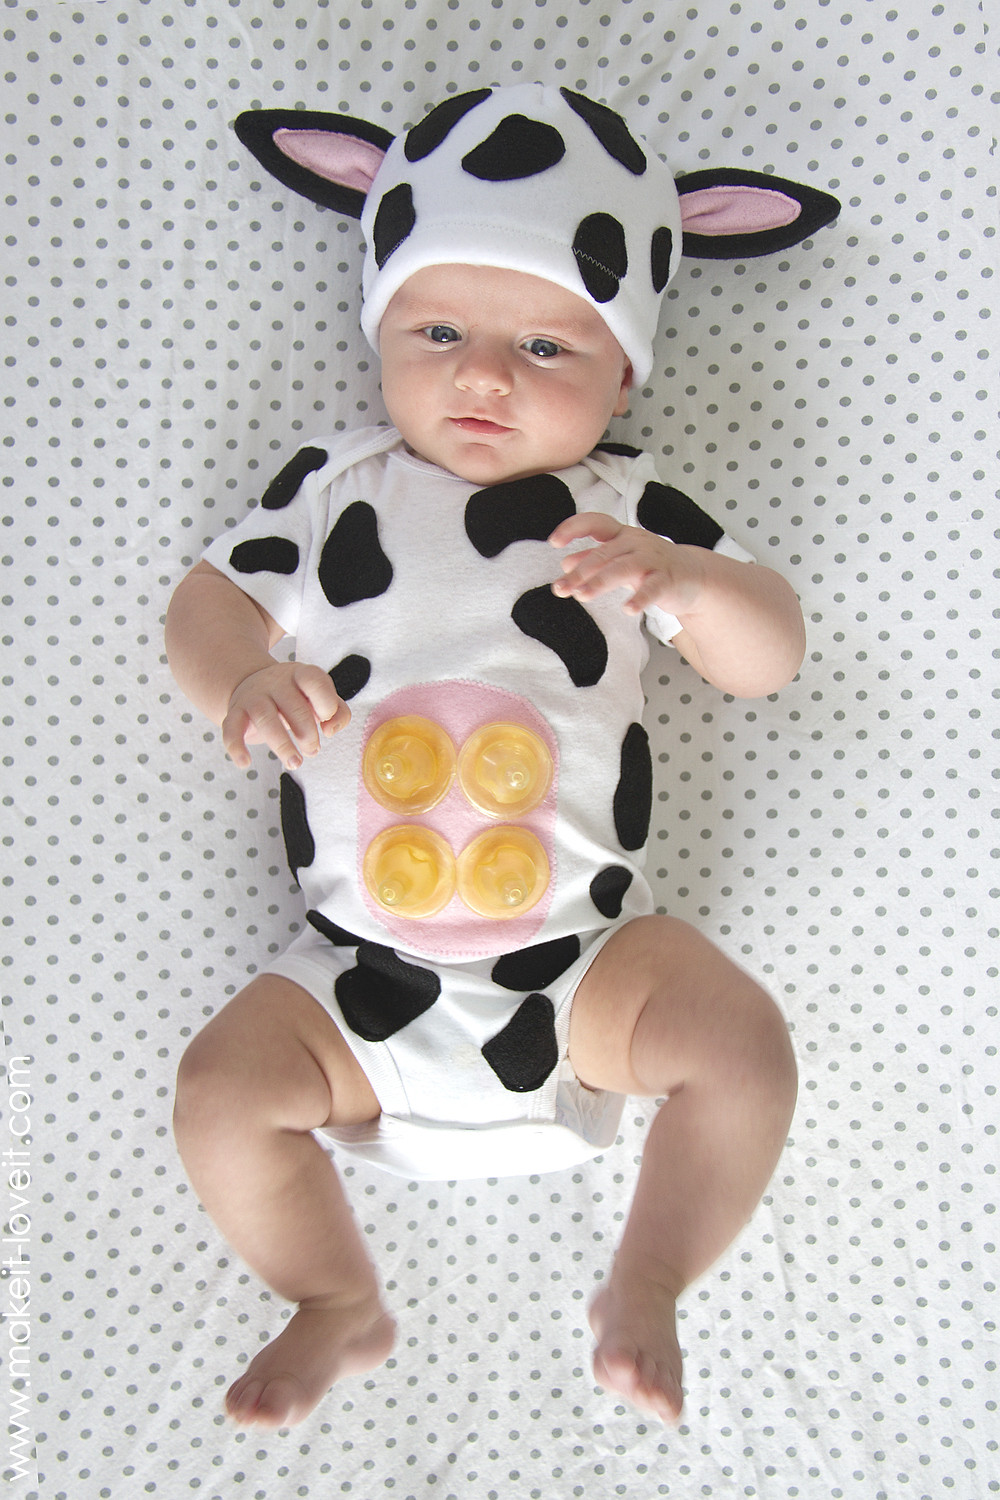 DIY Cow Costume For Adults
 BABY Cow Costume with an Udder Really Awesome Costumes